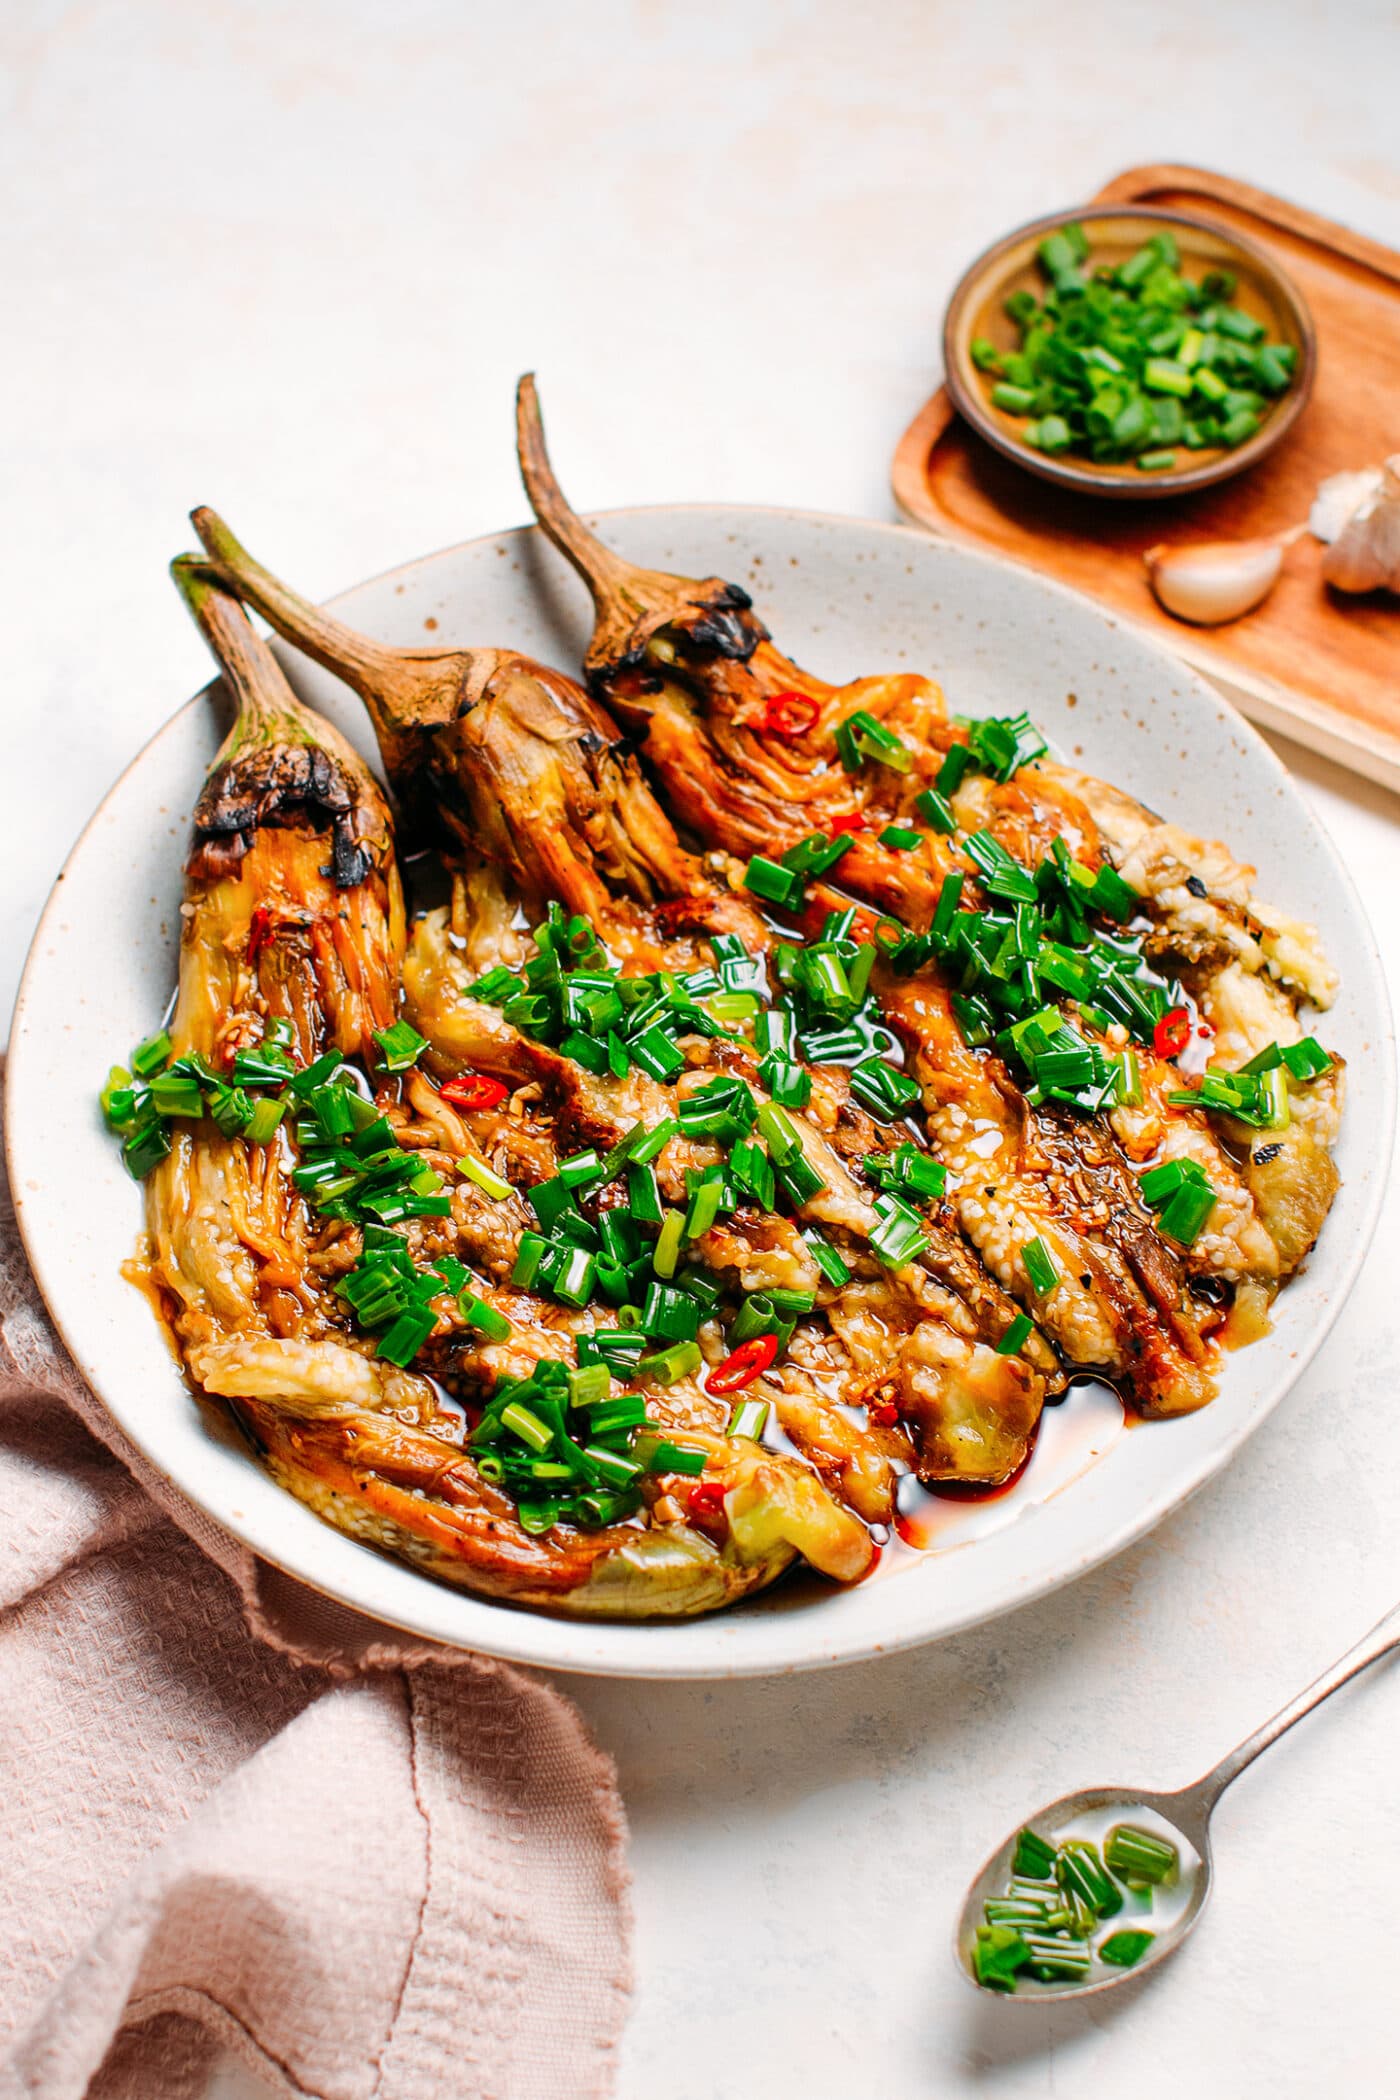 Grilled eggplants topped with green onions, garlic, and chili.